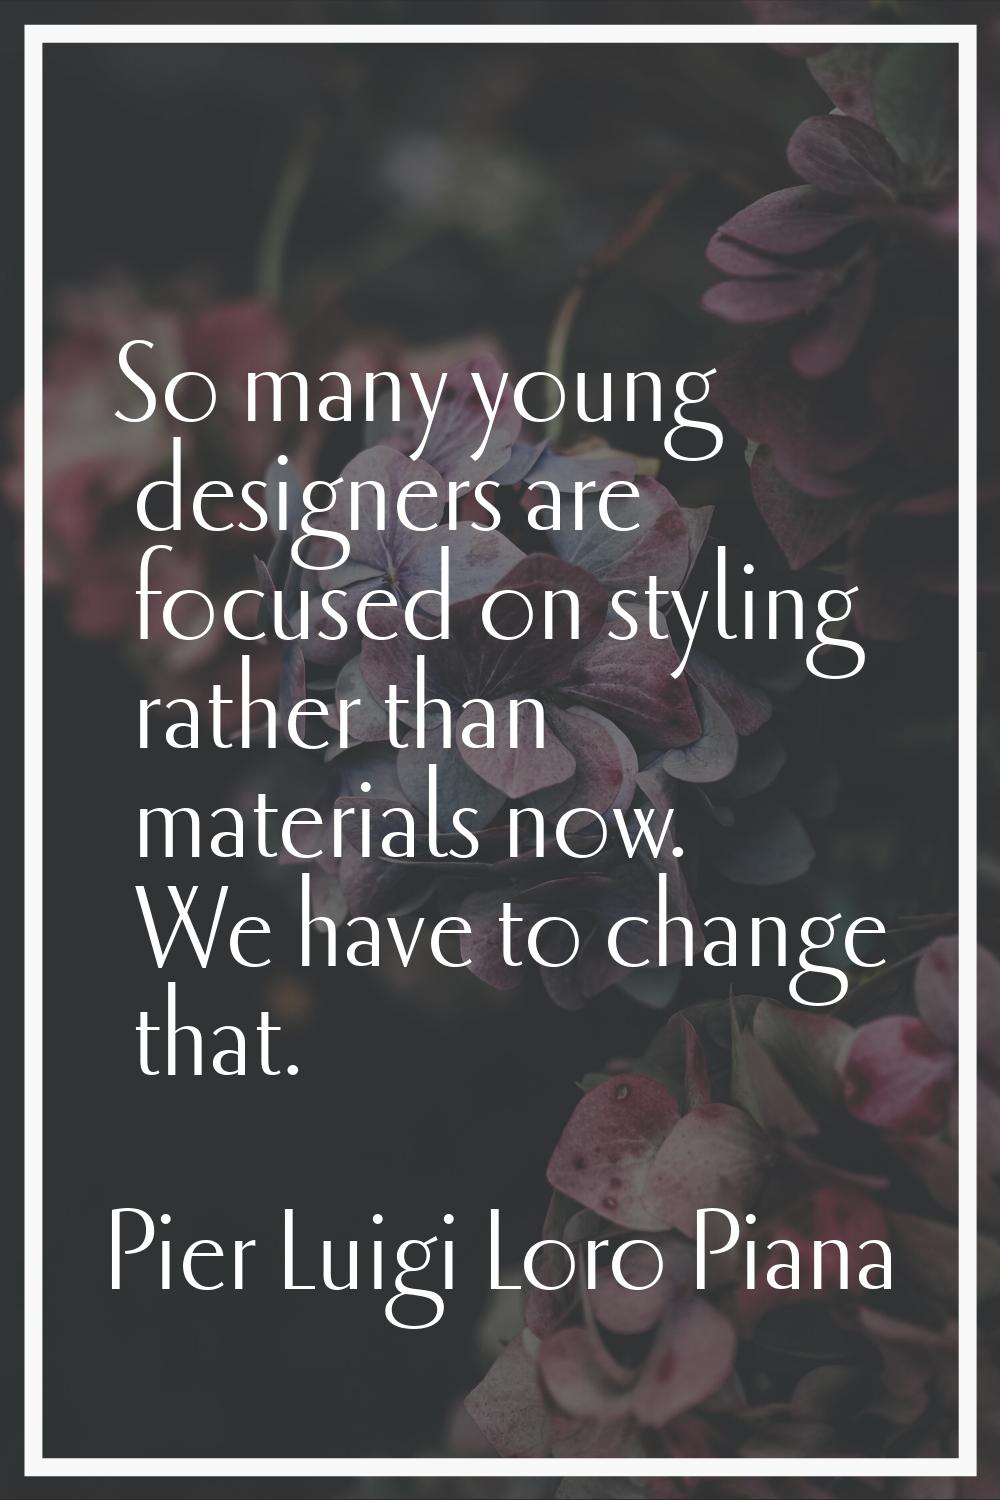 So many young designers are focused on styling rather than materials now. We have to change that.